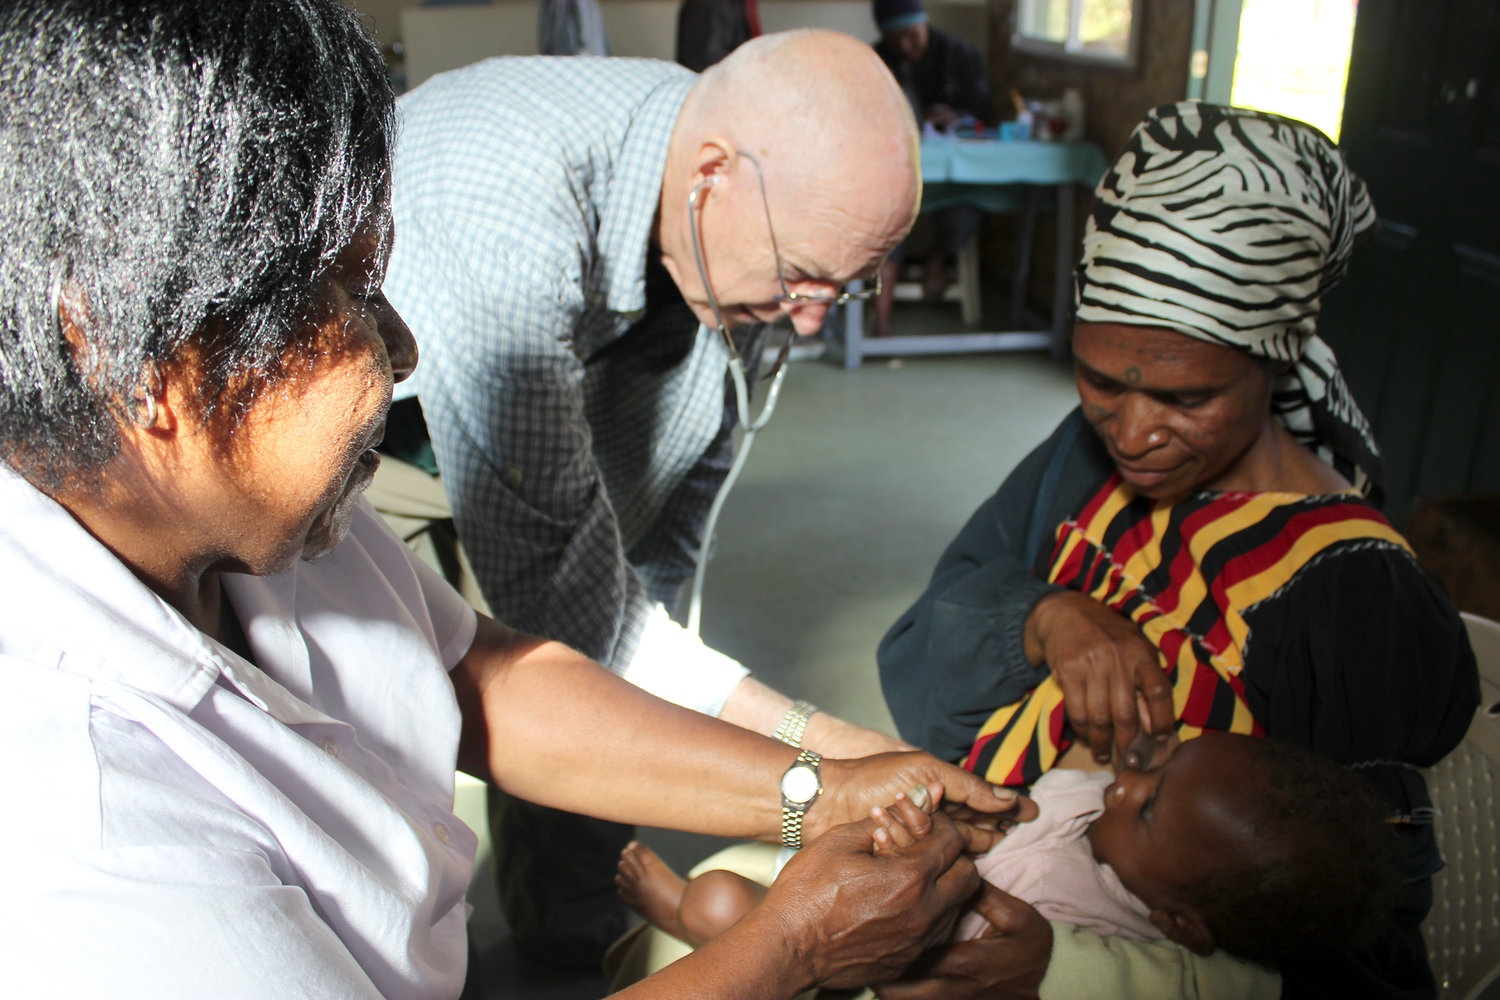 Dr. Larry Hull examines a child with a heart murmur at the medical clinic at the Madan coffee plantation in September 2011 in Papua New Guinea. Hull and his wife, Aarlie own the non-profit plantation and have built a birthing center and medical center for the community. According to Mrs. Hull, the birthing center is primarily used to identify high-risk pregnancies so they can be sent to the missionary hospital nearly 30 kilometers away.